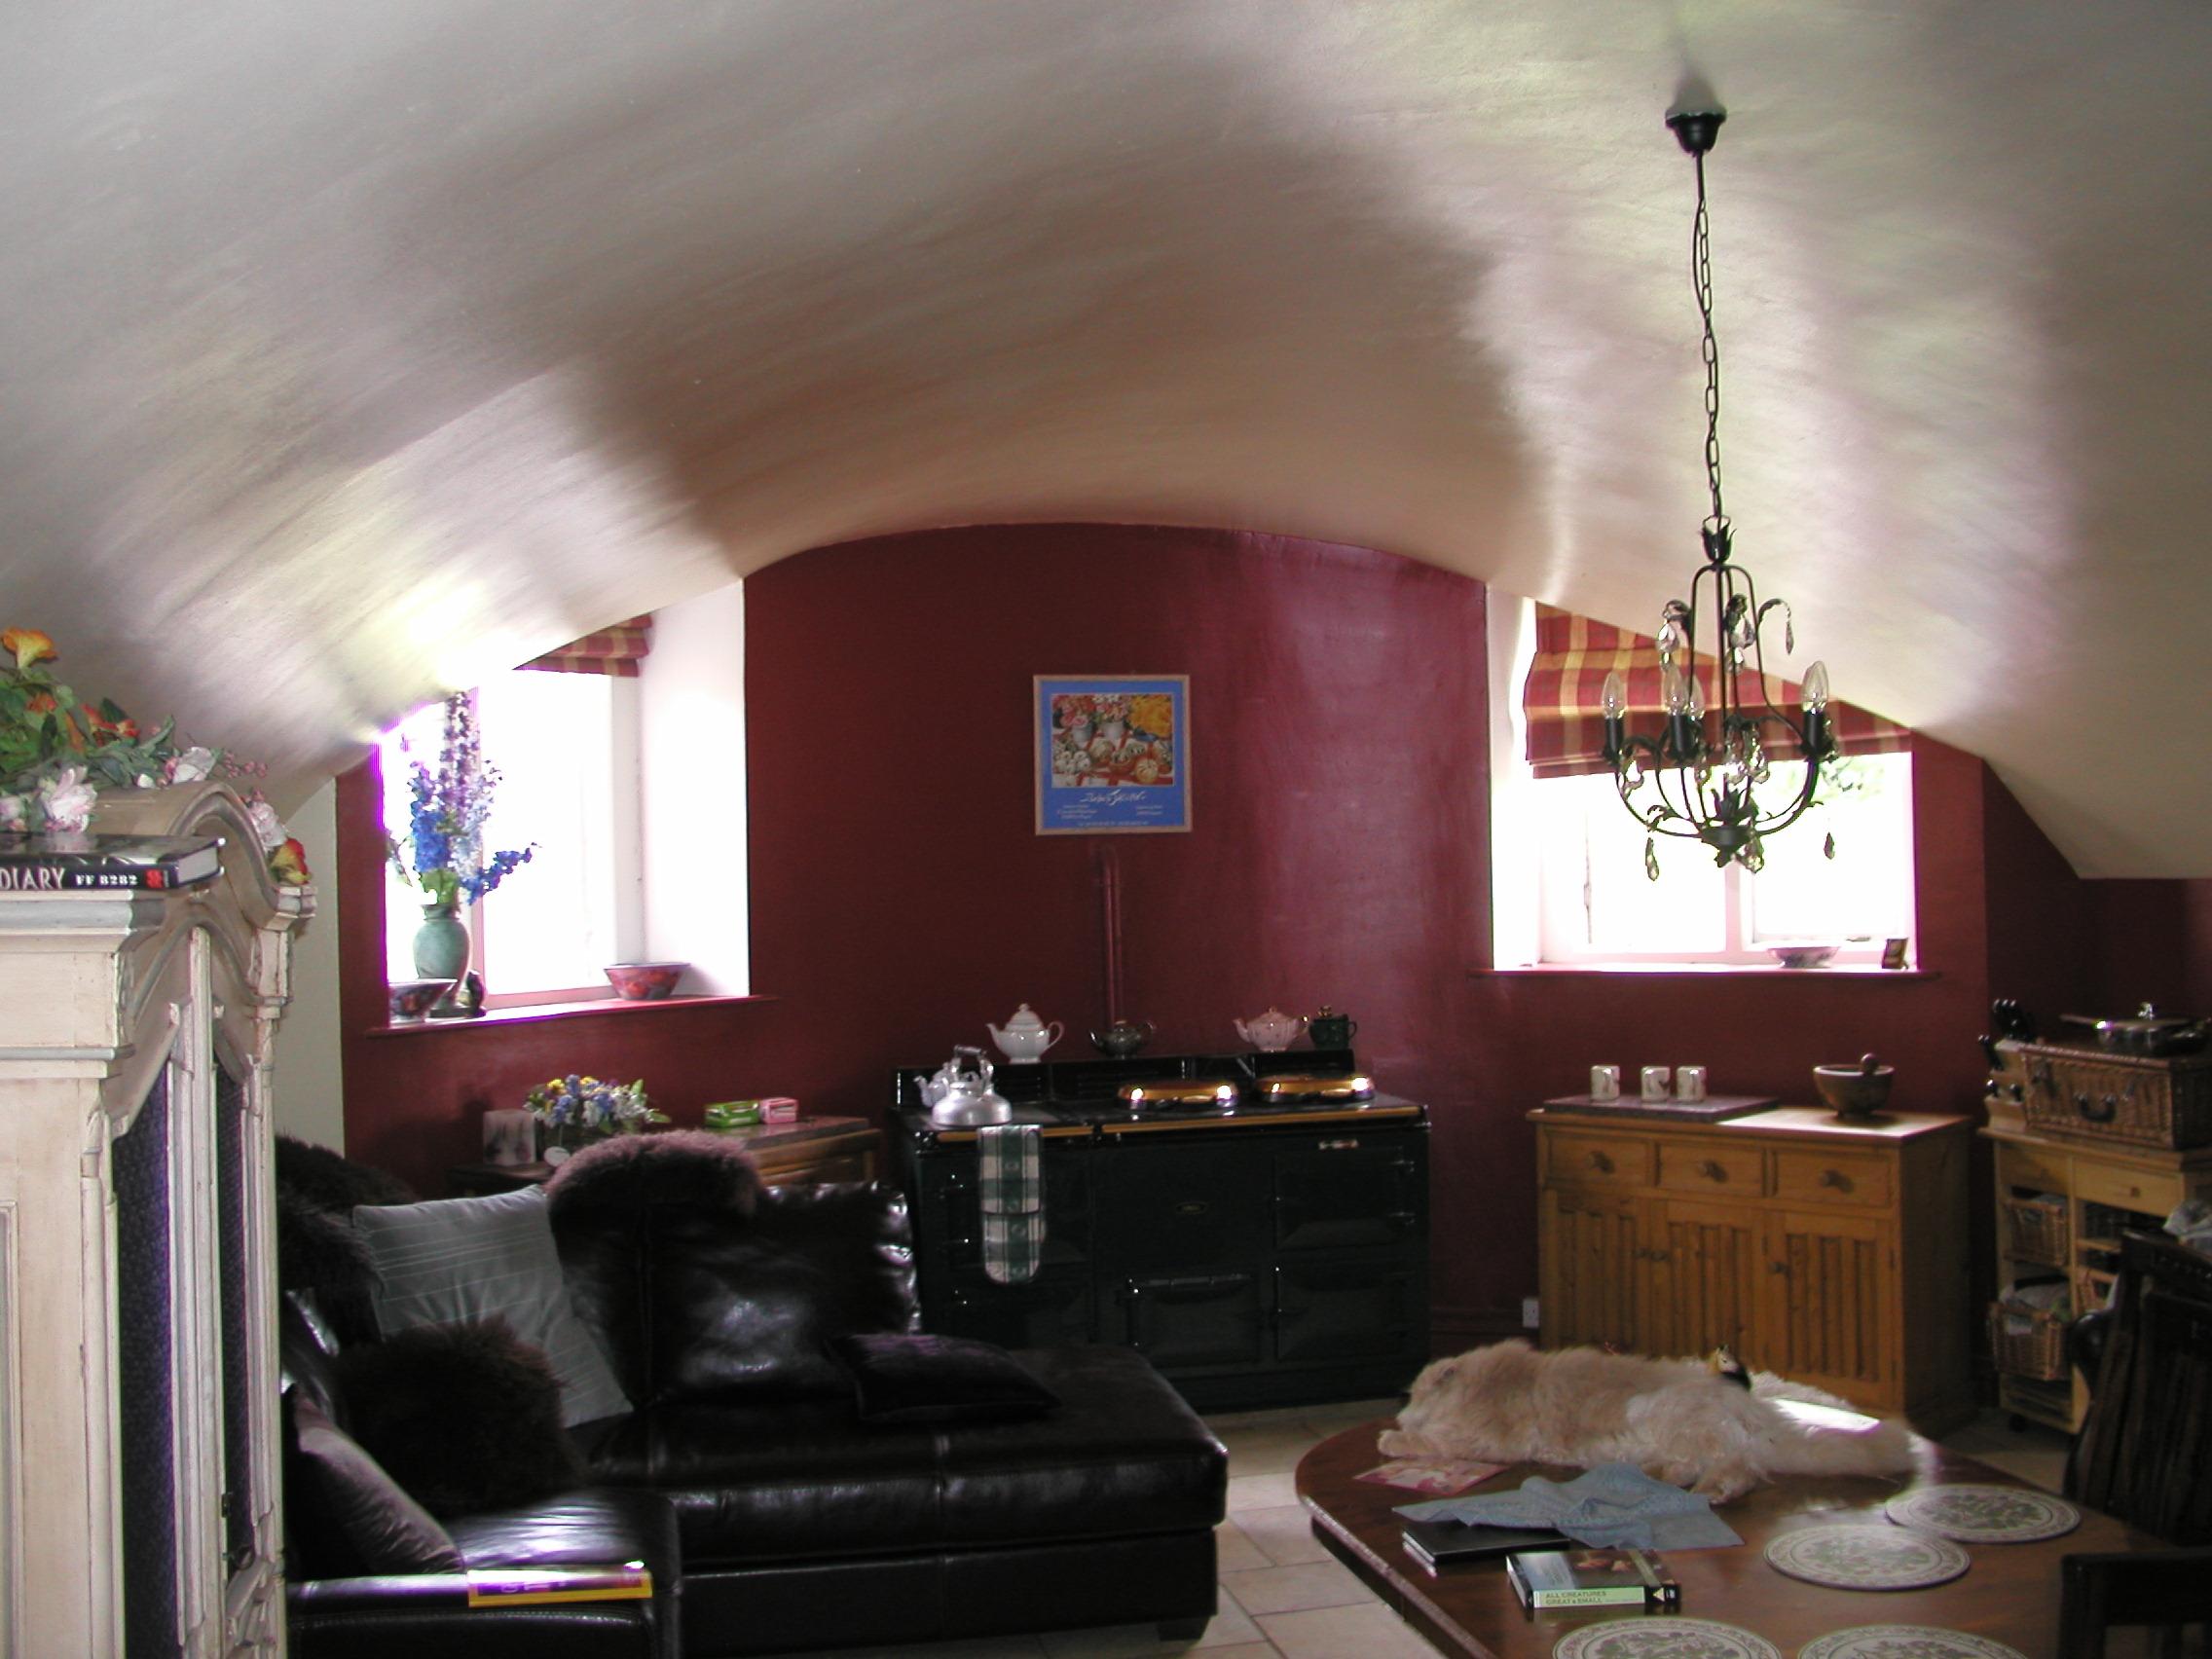 JPEG image -Basement kitchen with vaulted ceilings